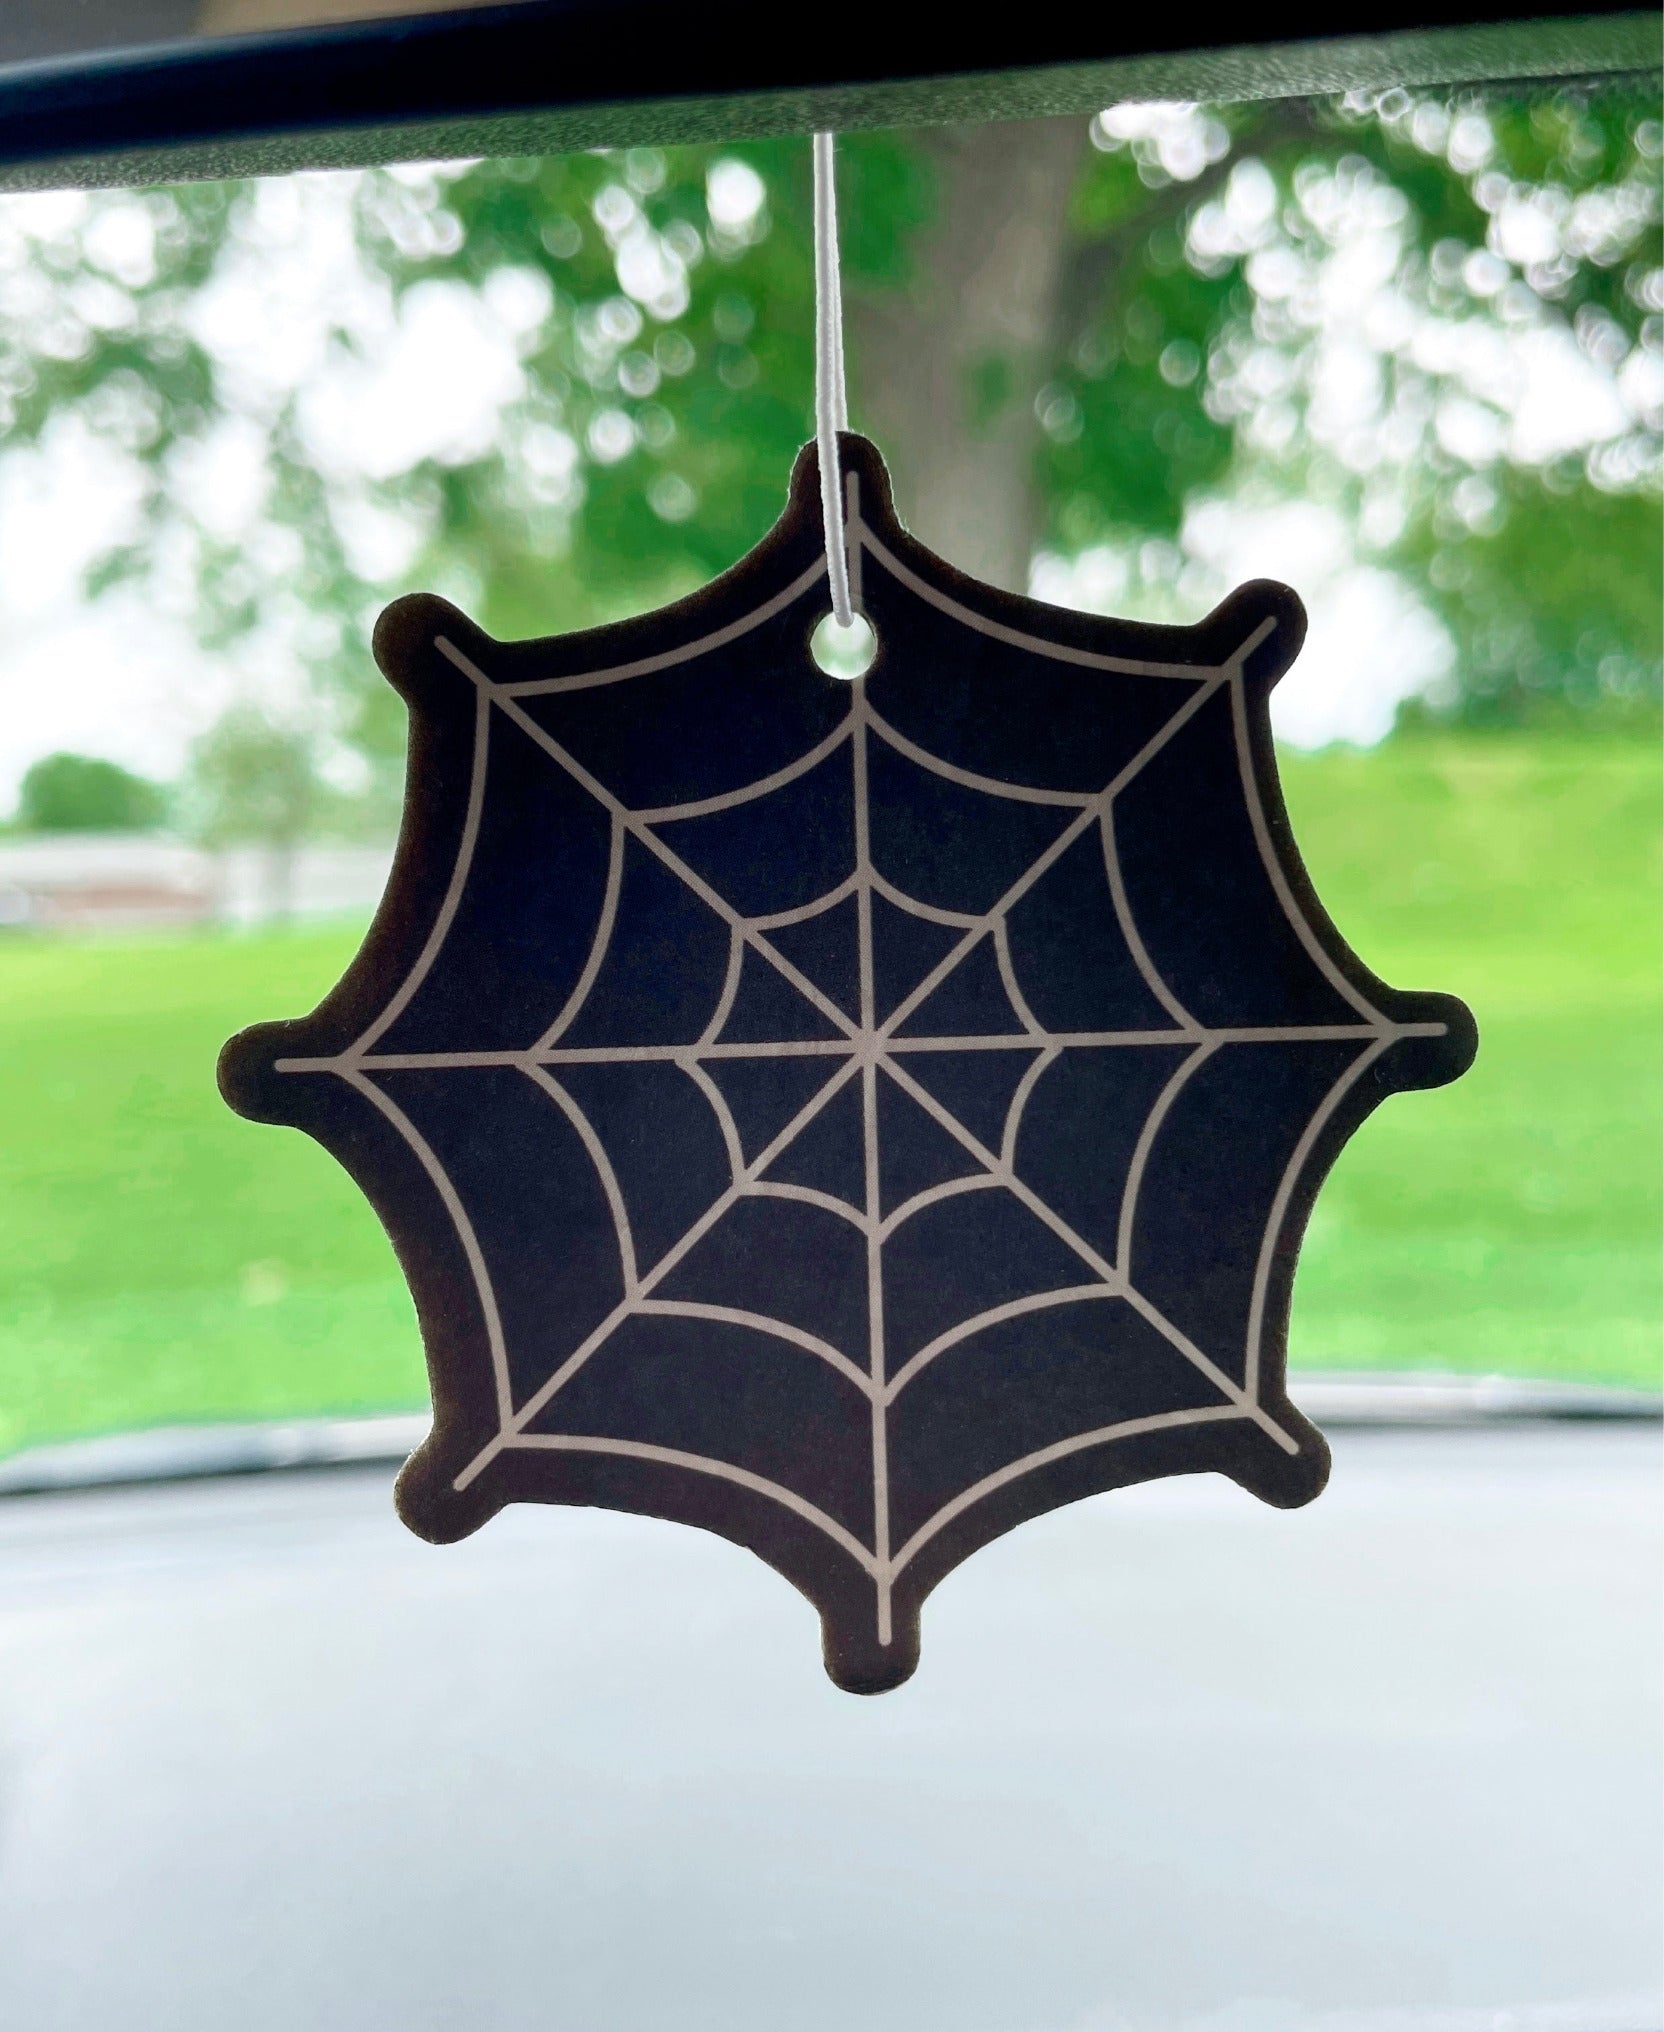 Pictured is an air freshener in the shape of a spider web.